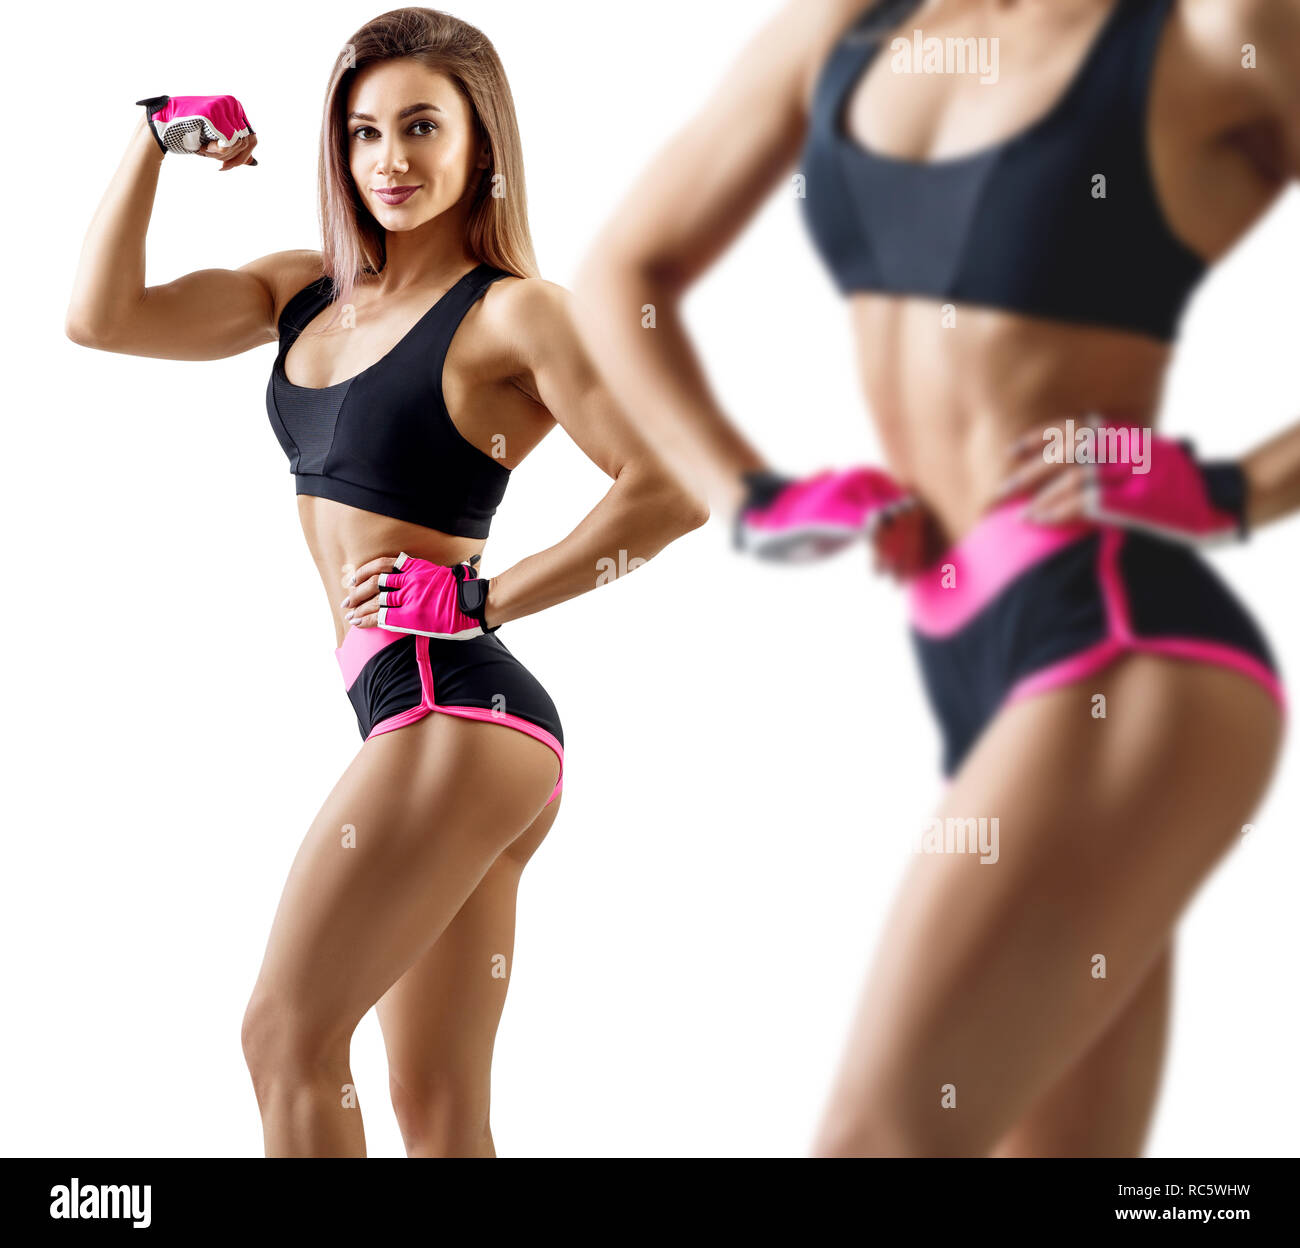 Collage of woman in sportswear demonstrated her athletic body. Stock Photo